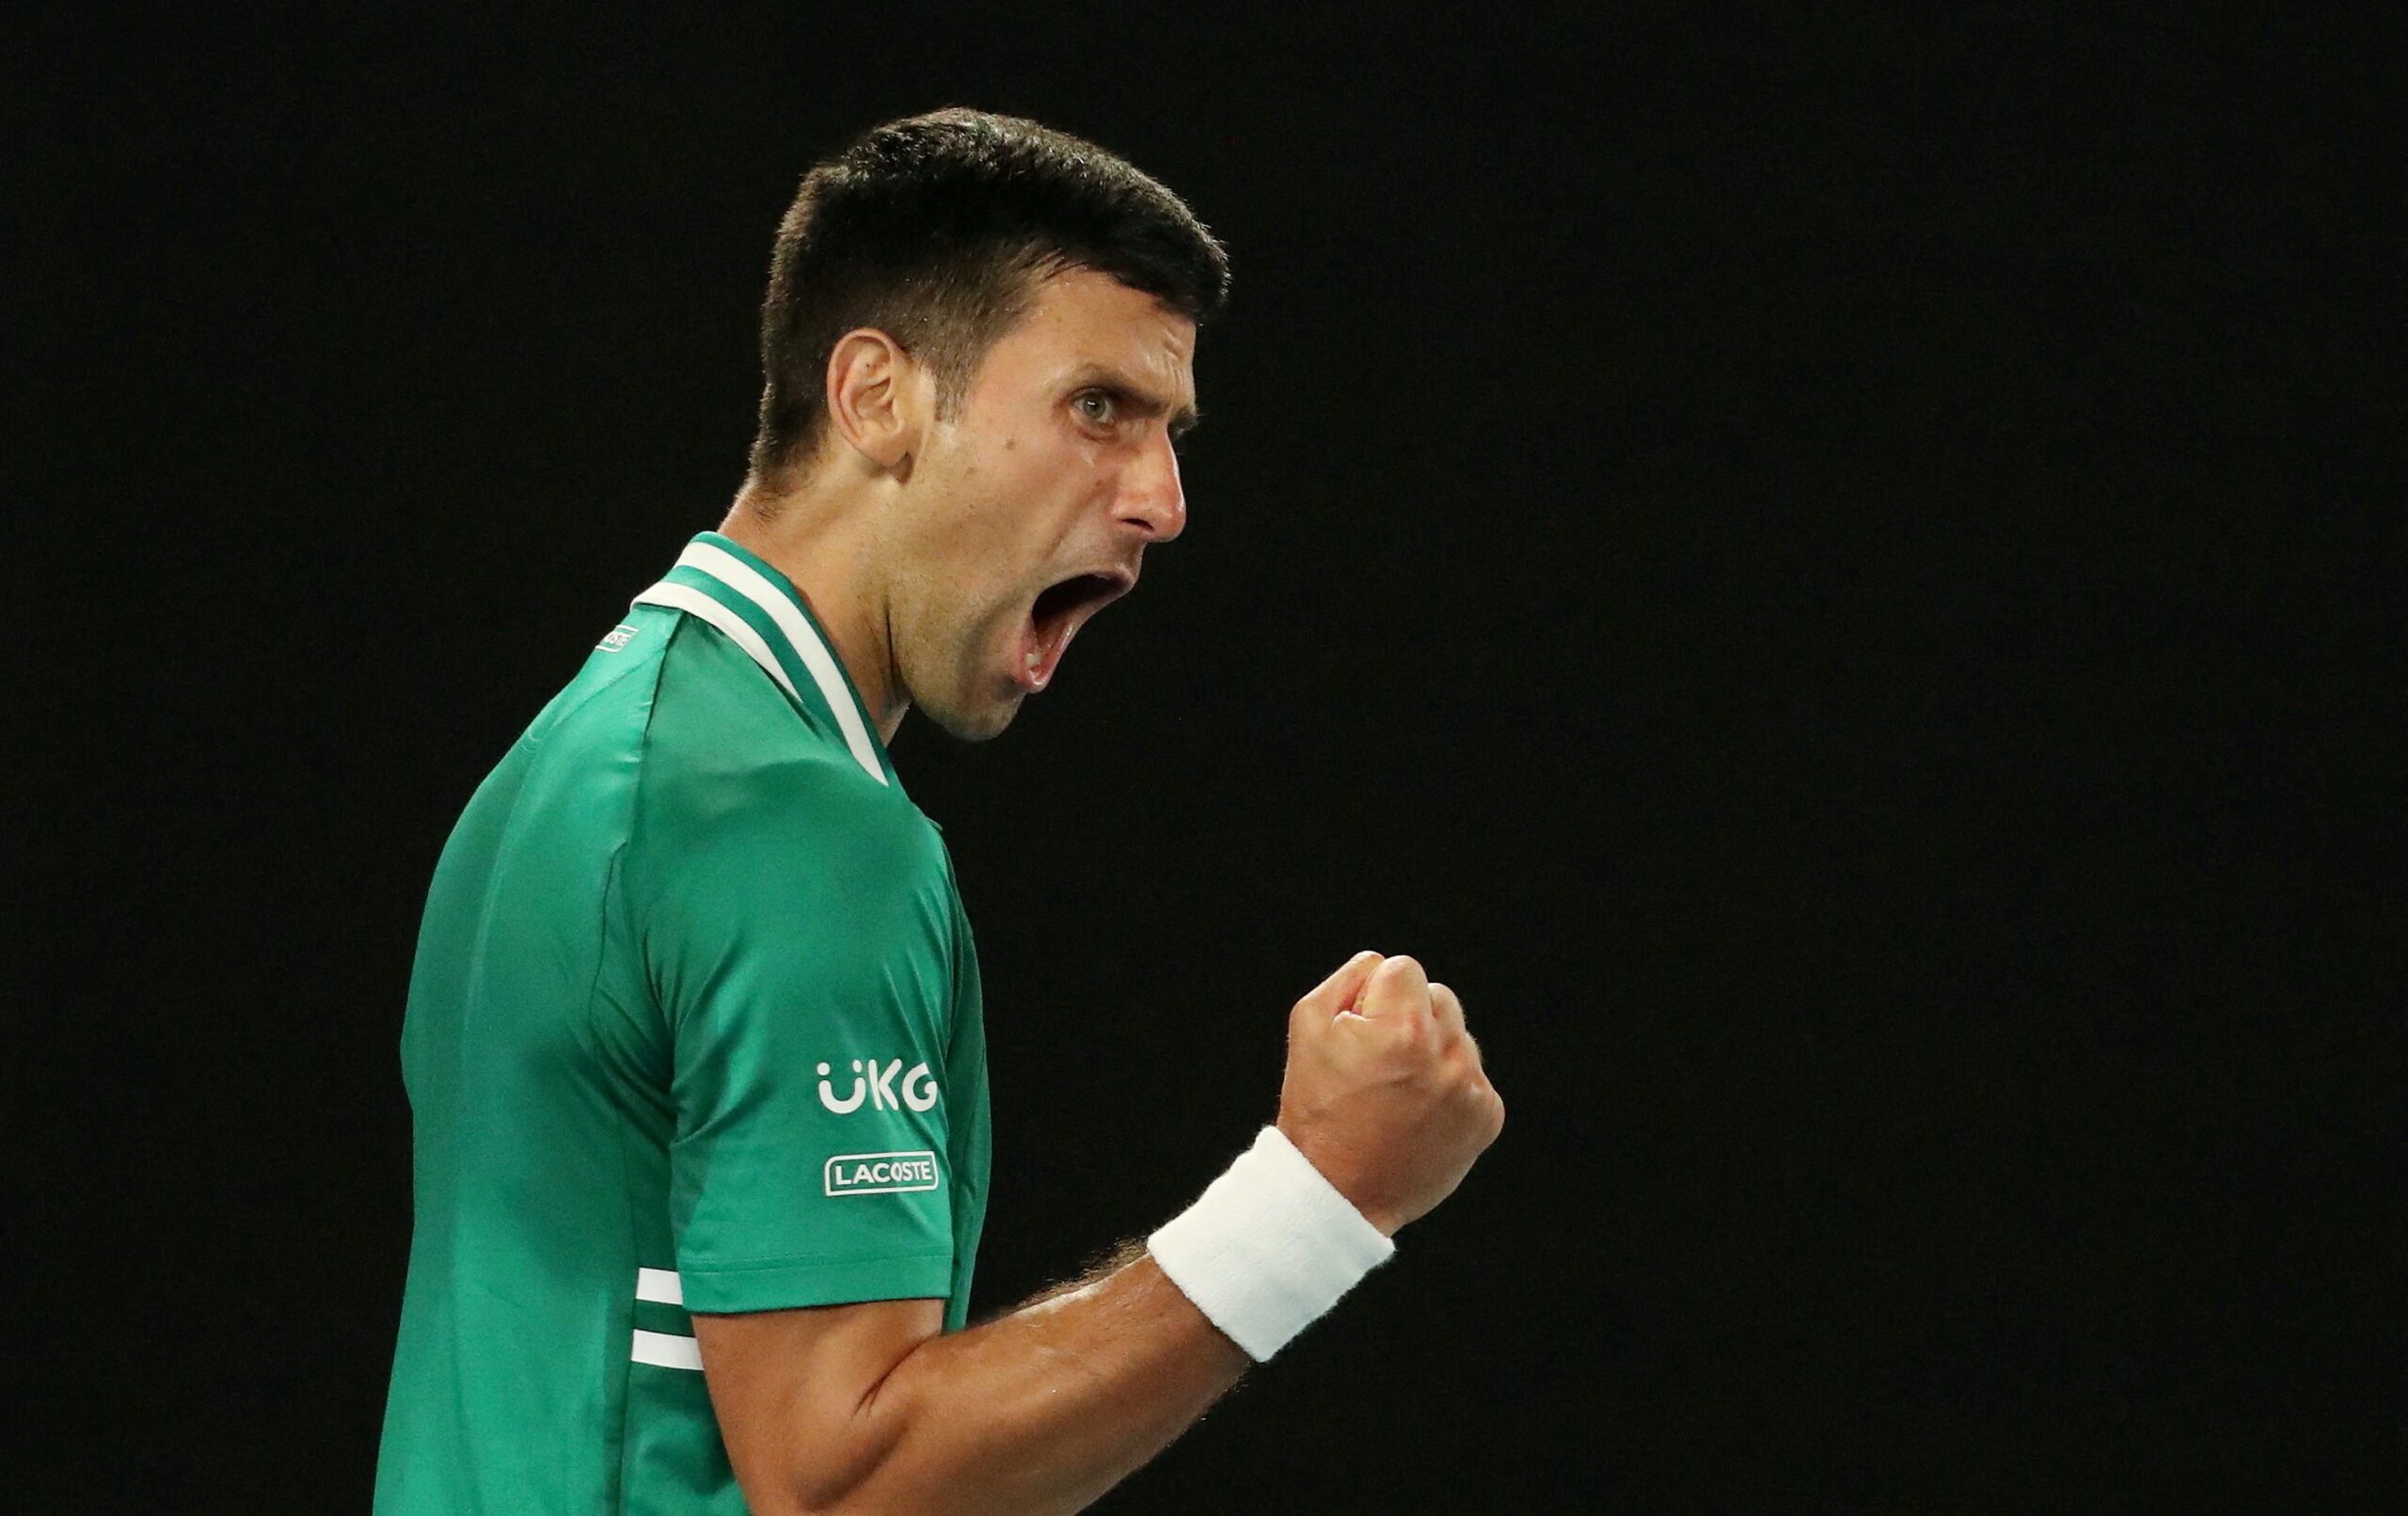 Australian court orders Djokovic be released from immigration detention